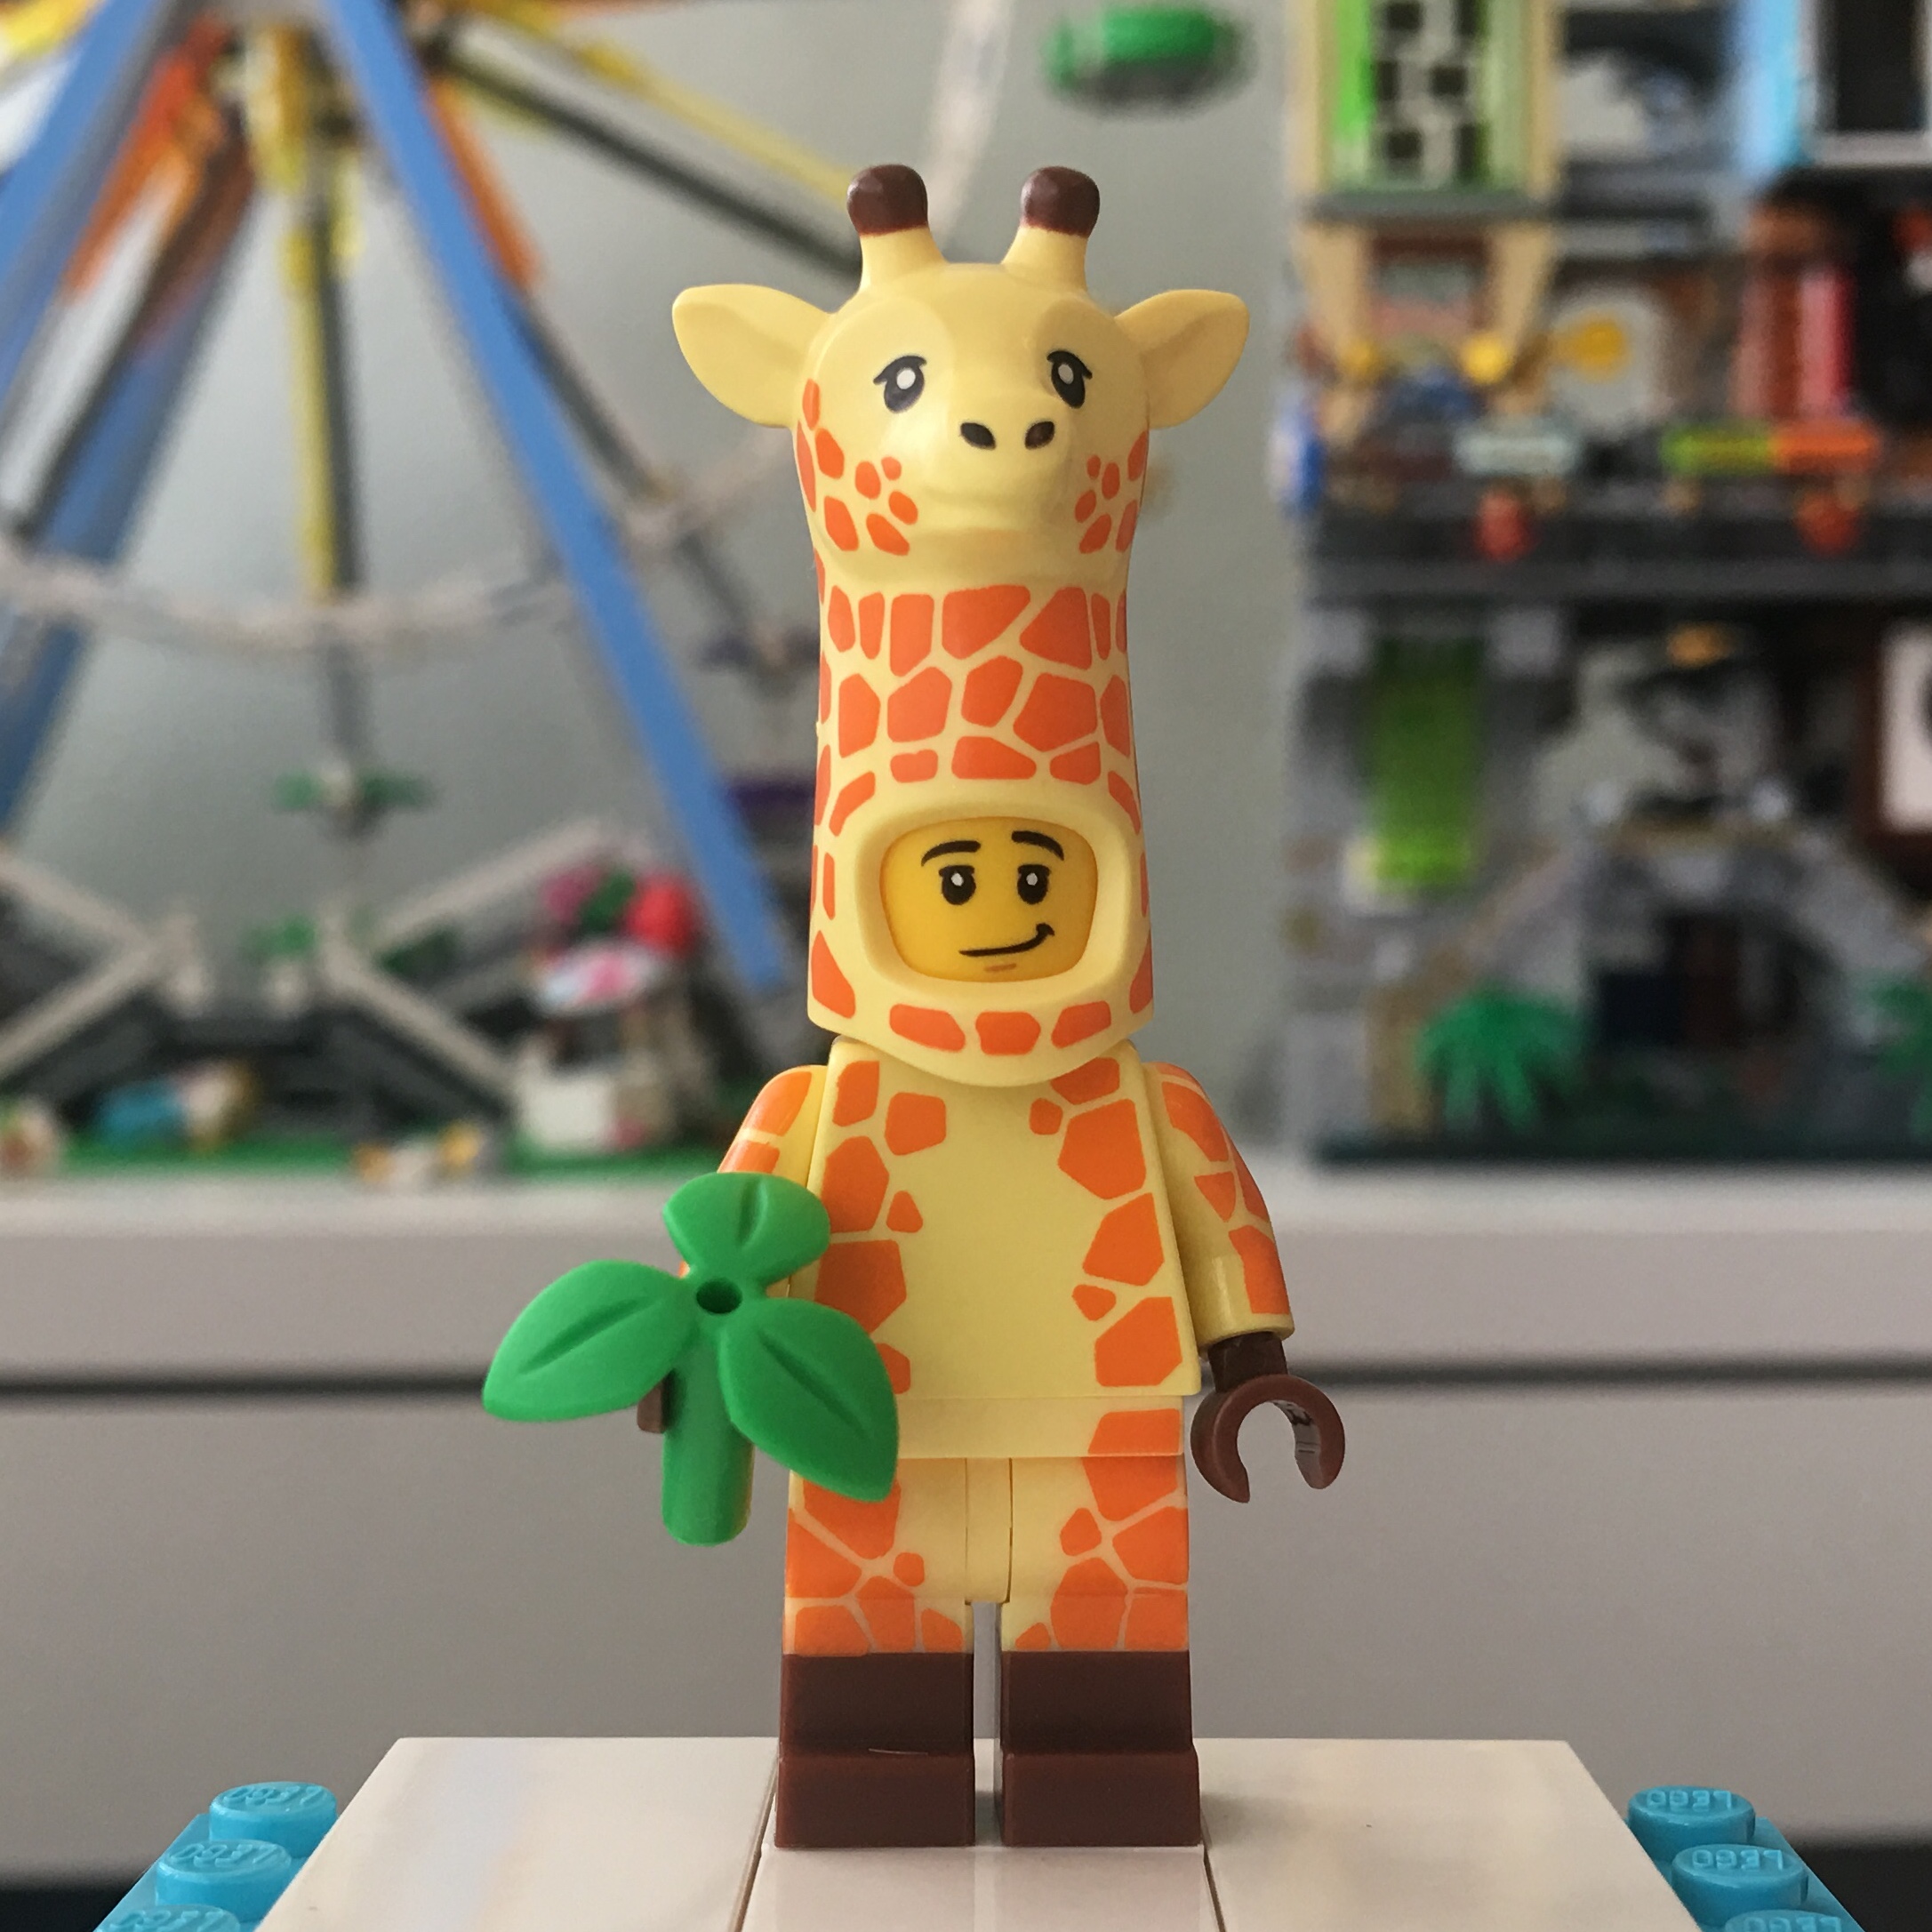 NEW FACTORY SEALED THE LEGO MOVIE 2 MINIFIGURE SERIES GIRAFFE SUIT GUY 71023 